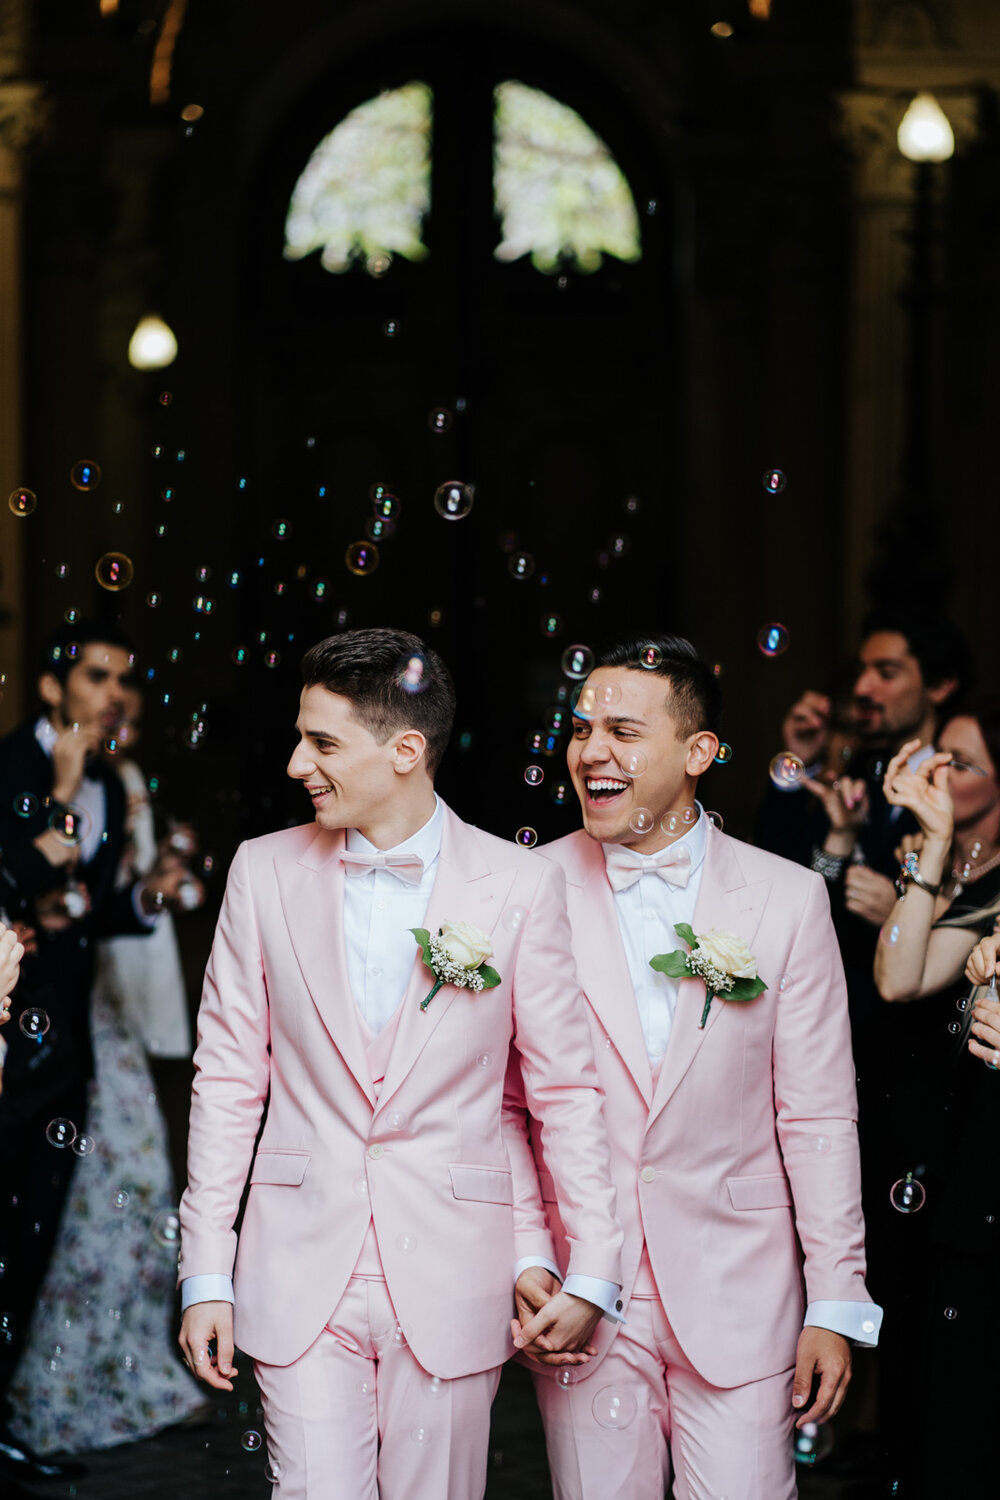  Both grooms walk through the middle of a bubble tunnel at Paris same sex wedding while family and friends blow bubbles around them 